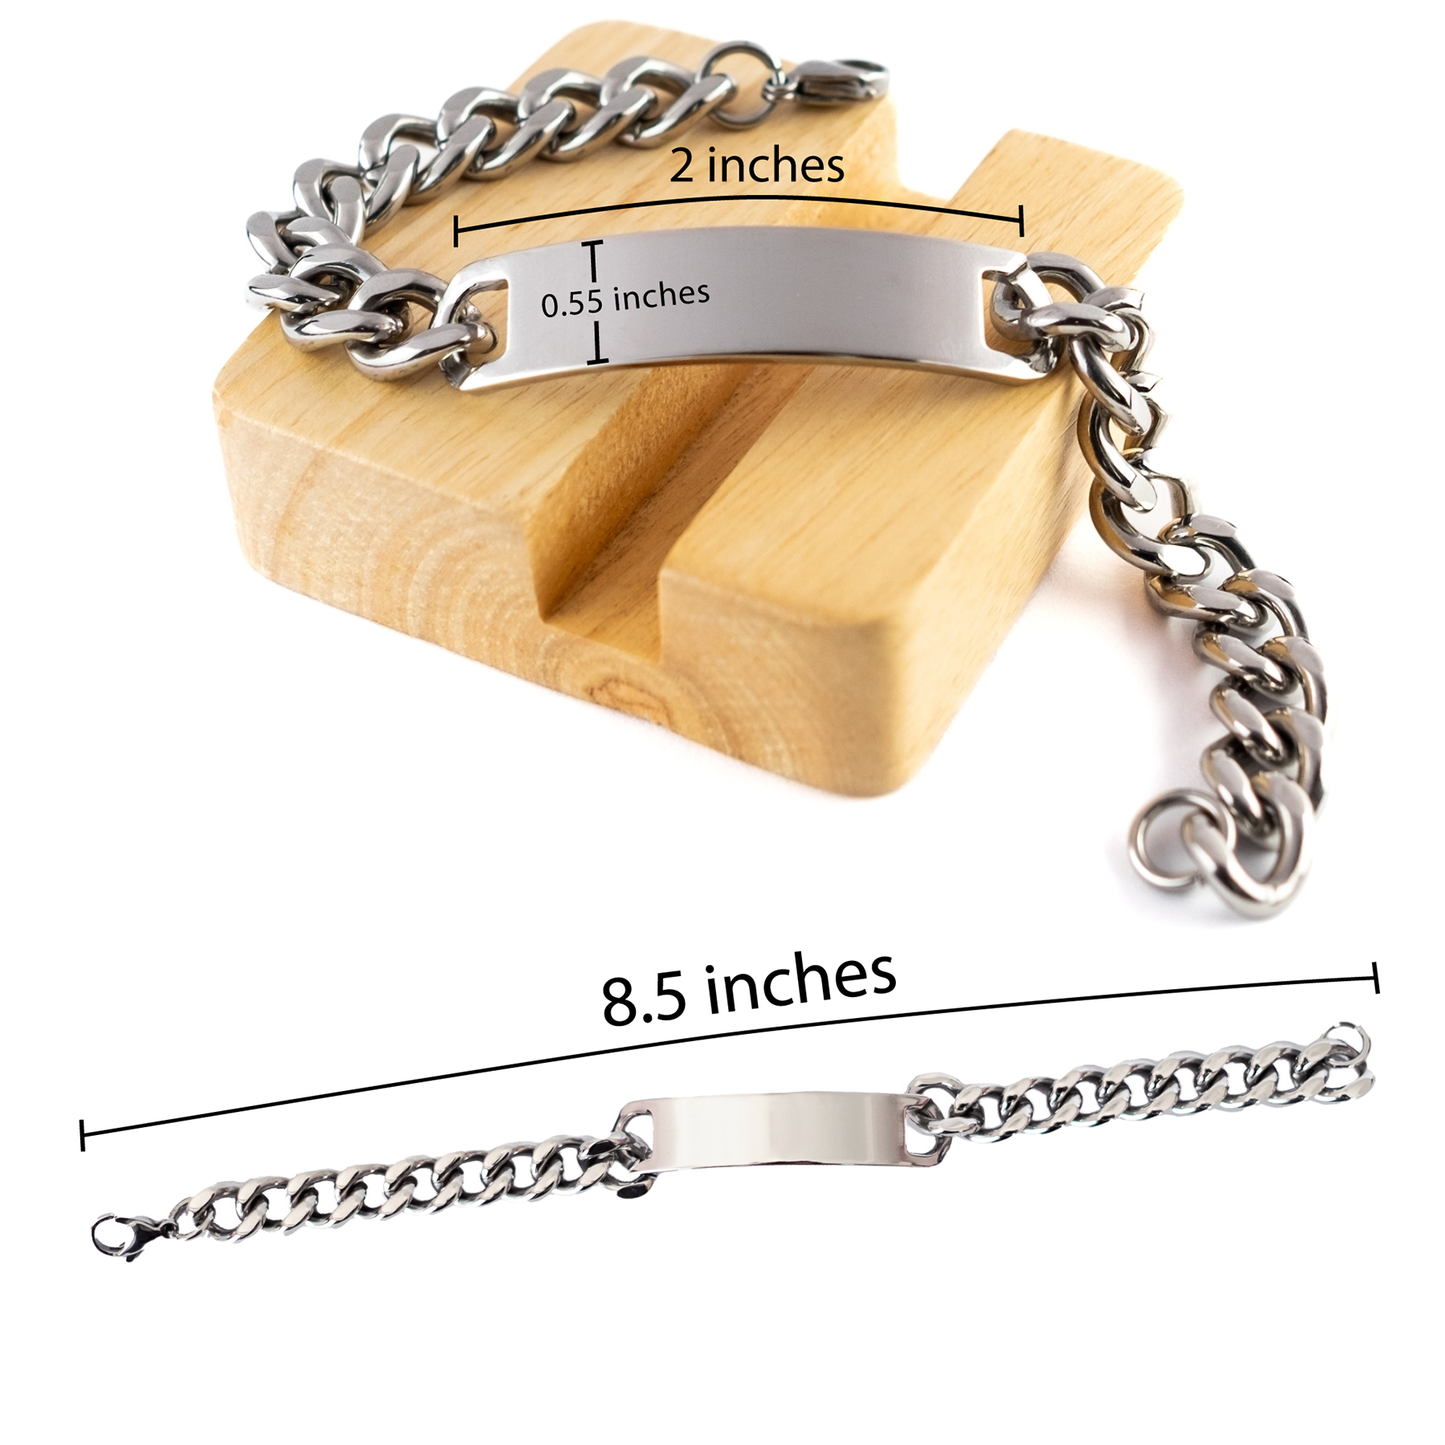 Gifts for Zookeeper, In a world where you can be anything, Appreciation Birthday Cuban Chain Stainless Steel Bracelet for Men, Women, Friends, Coworkers